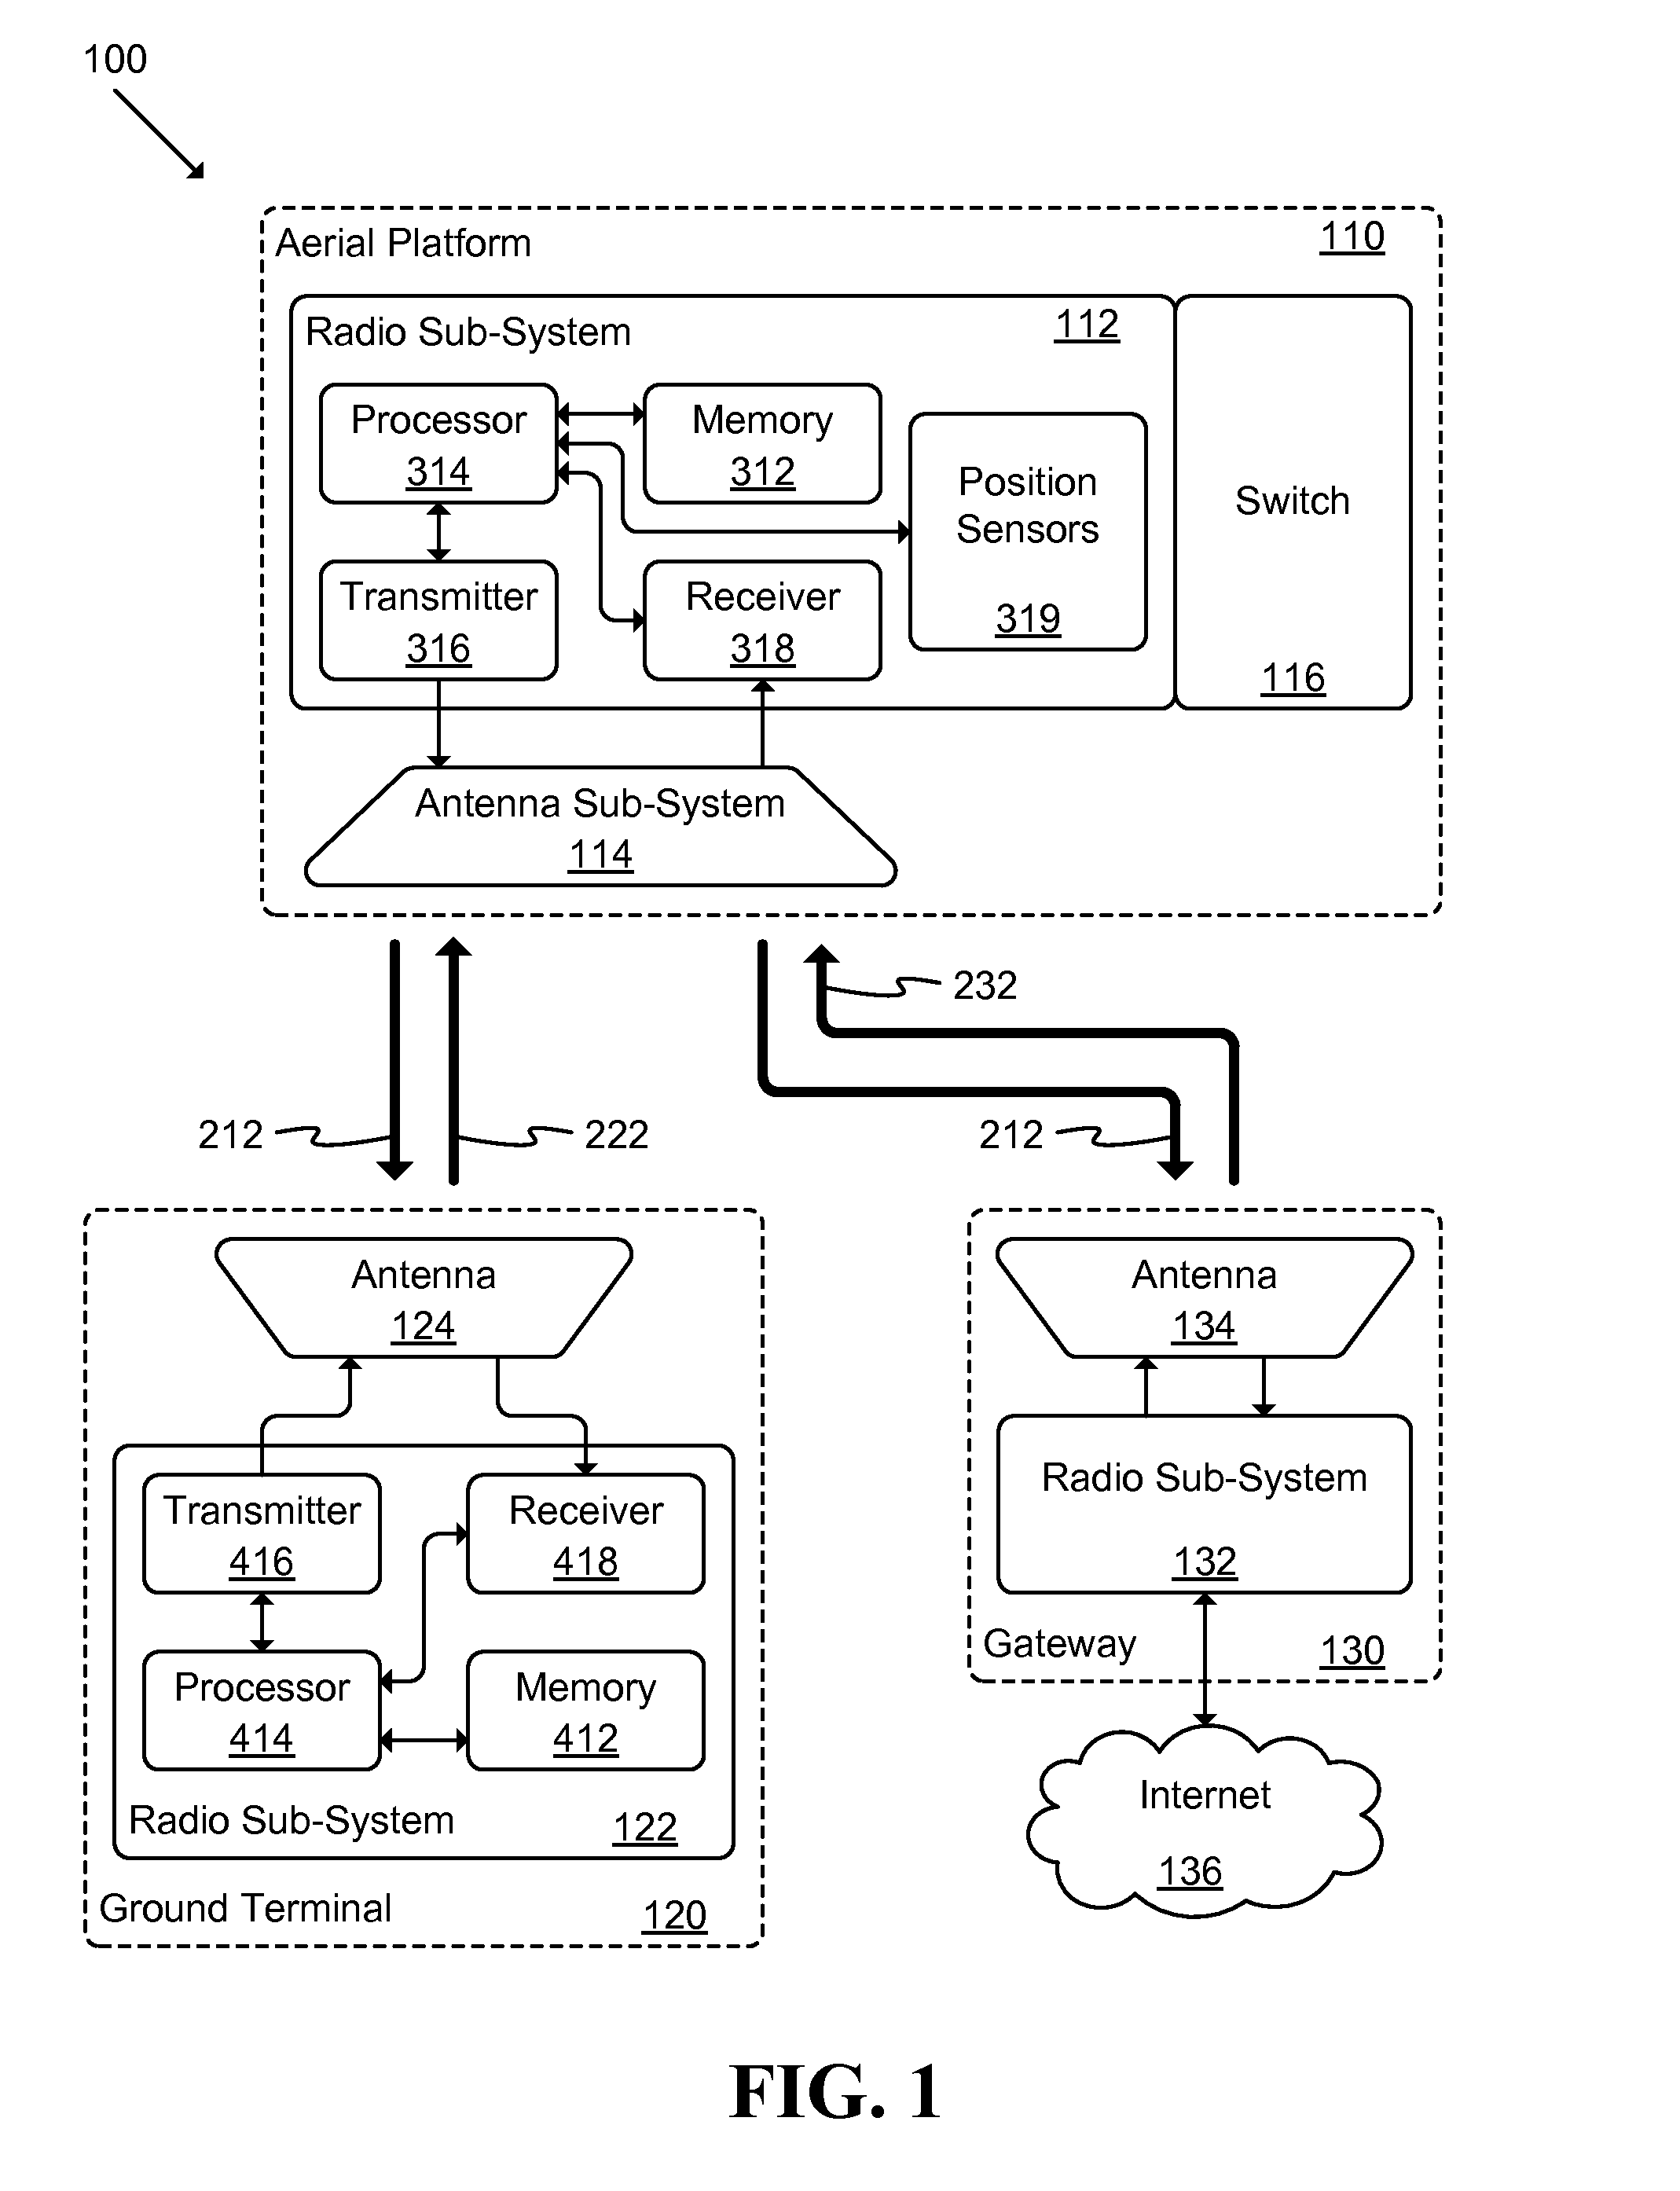 Unmanned Aerial Vehicle Communication Using Distributed Antenna Placement and Beam Pointing